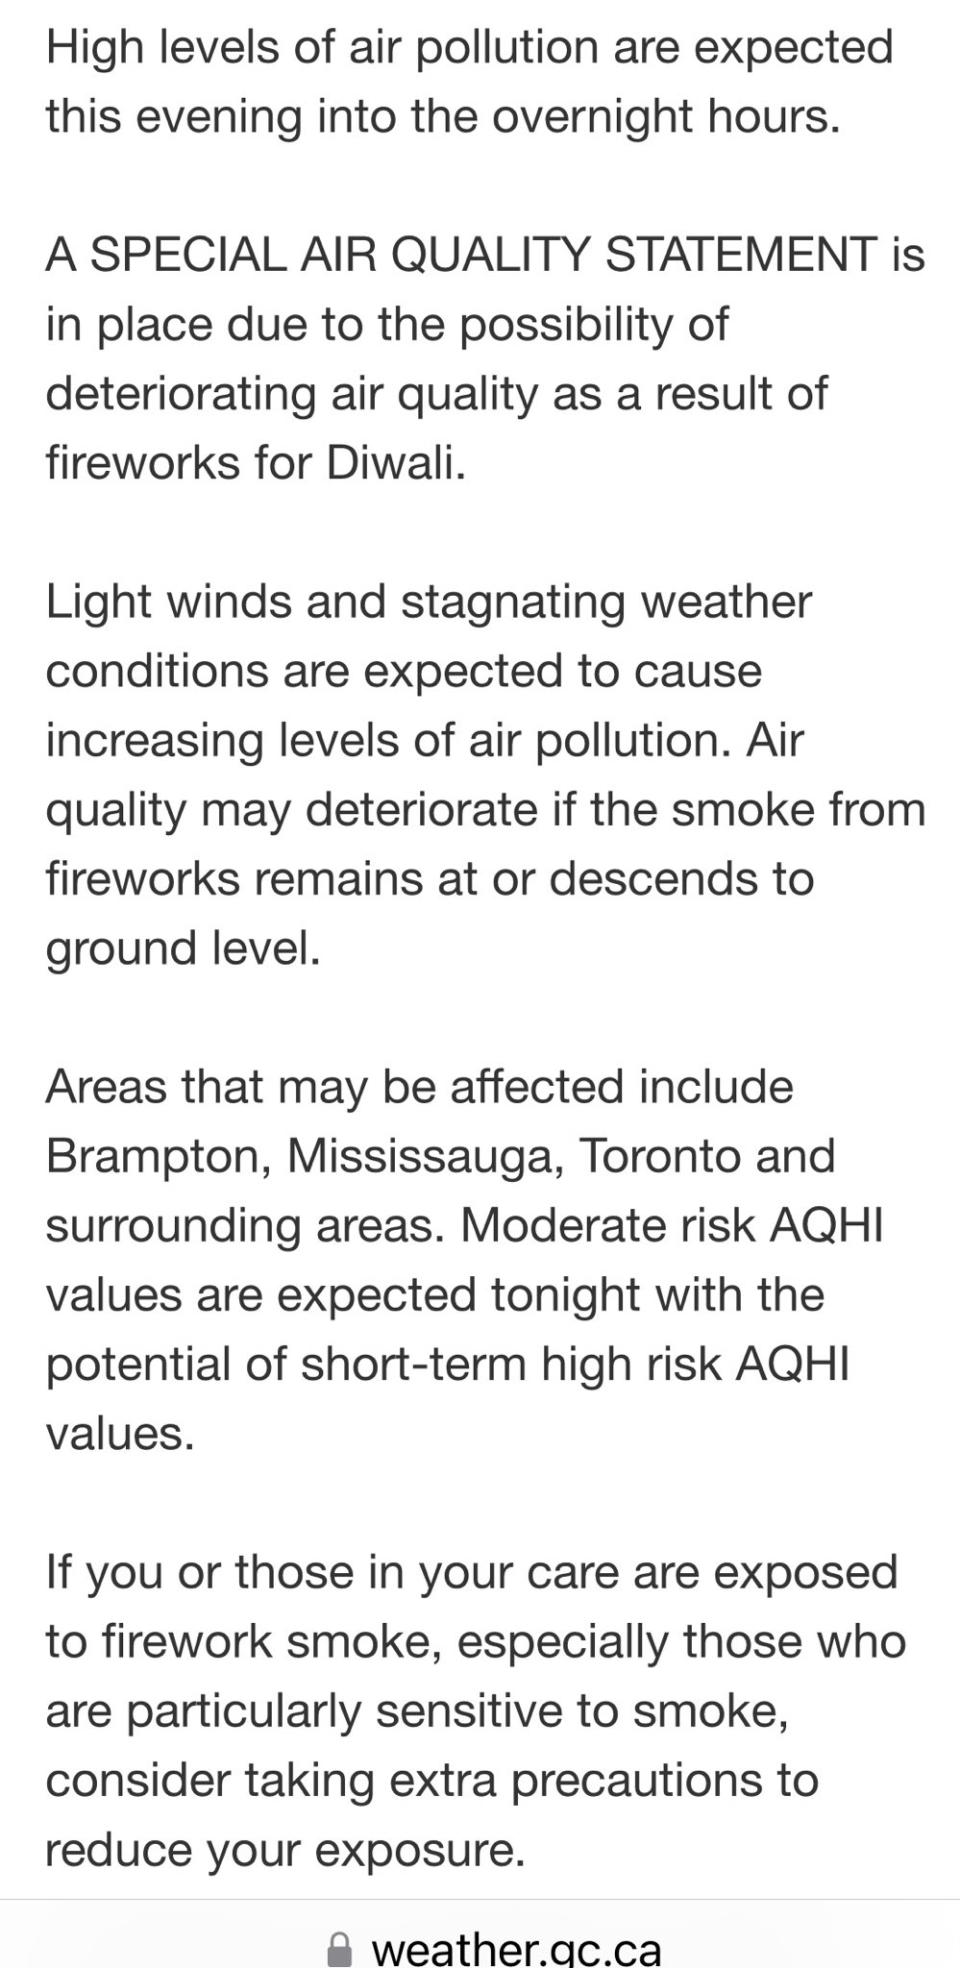 Environment Canada has issued a special air quality statement for Toronto, Brampton, Mississauga, Vaughan, Richmond Hill and Markham. The national weather agency warns says evening fireworks expected across the region as part of Diwali celebrations could contribute to ‘deteriorating air quality.’